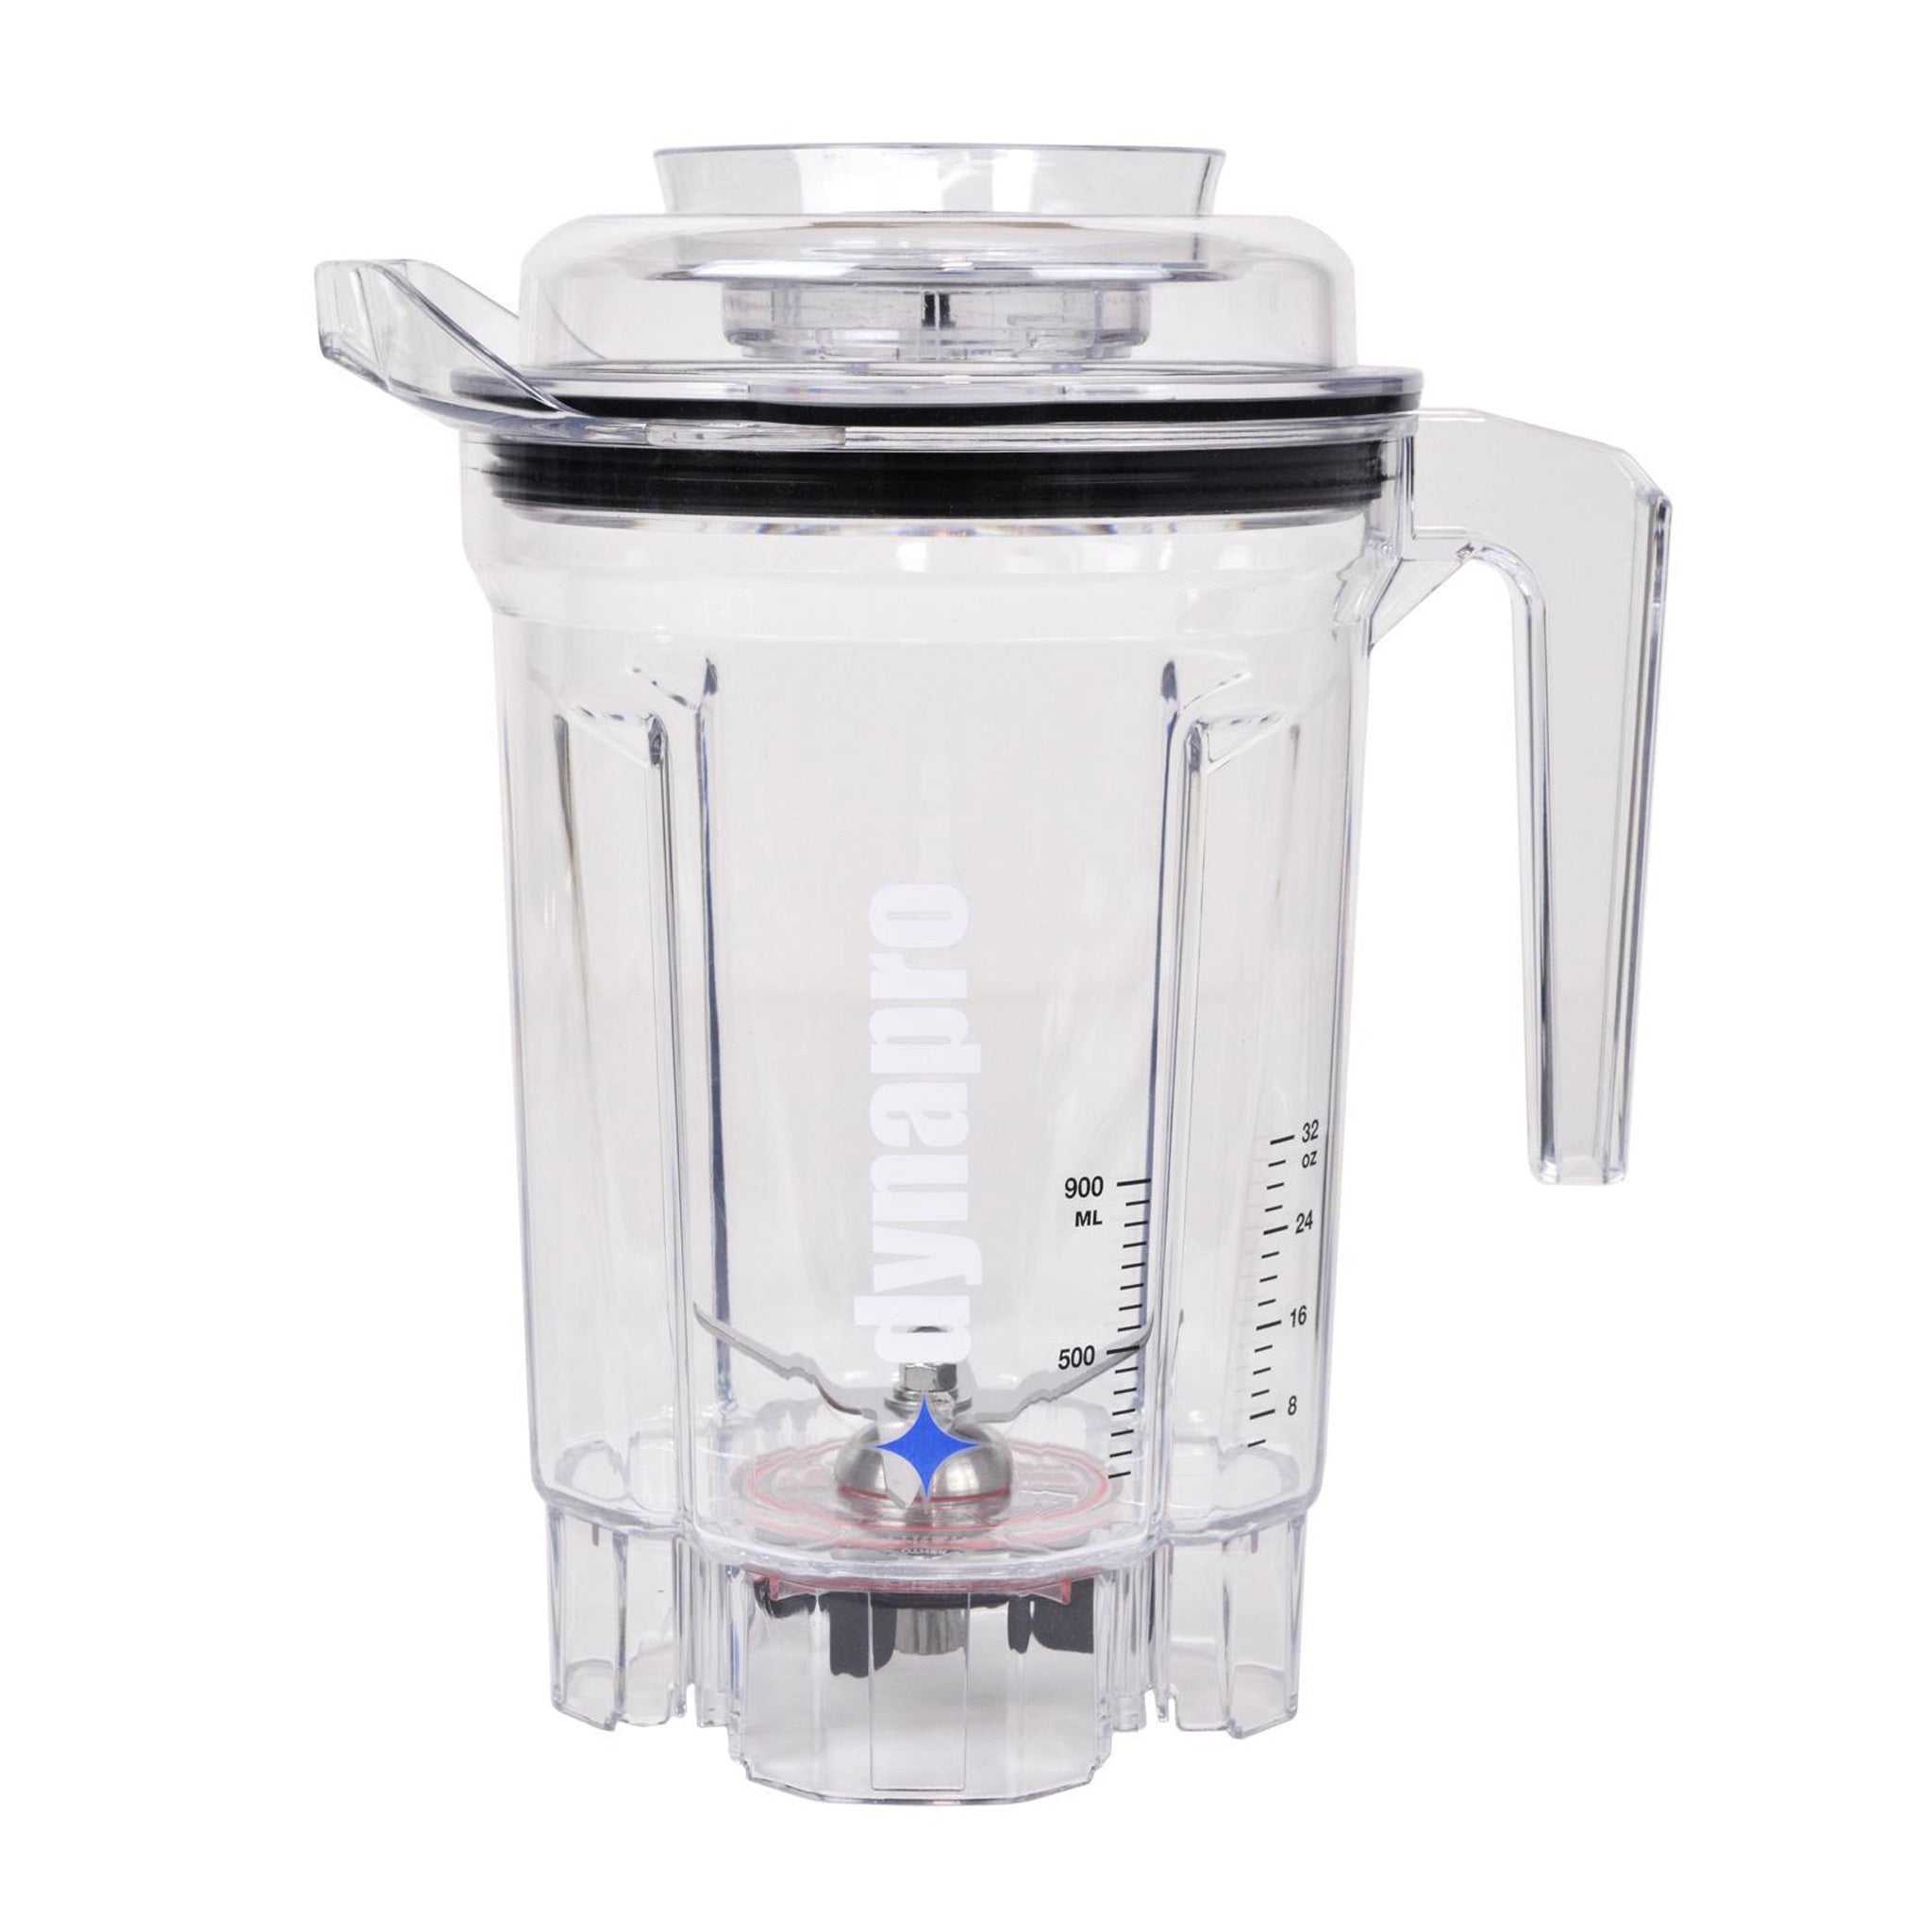 Dynapro® Commercial High-Speed Blender